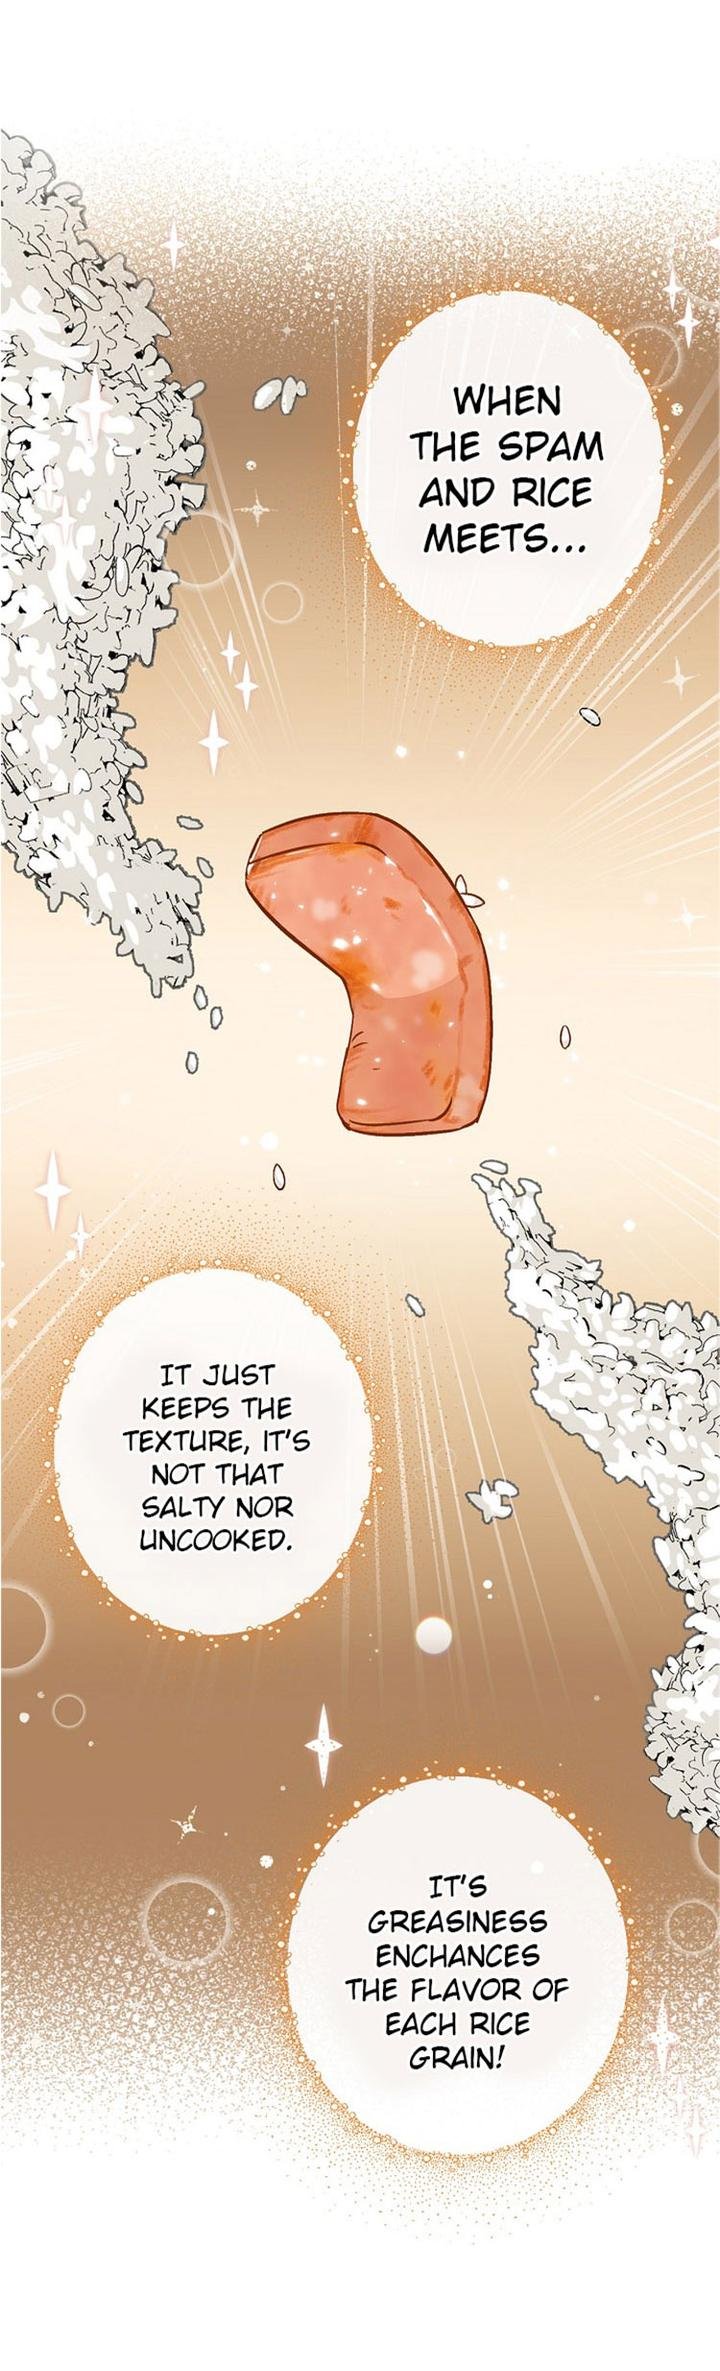 leveling-up-by-only-eating-chap-30-42